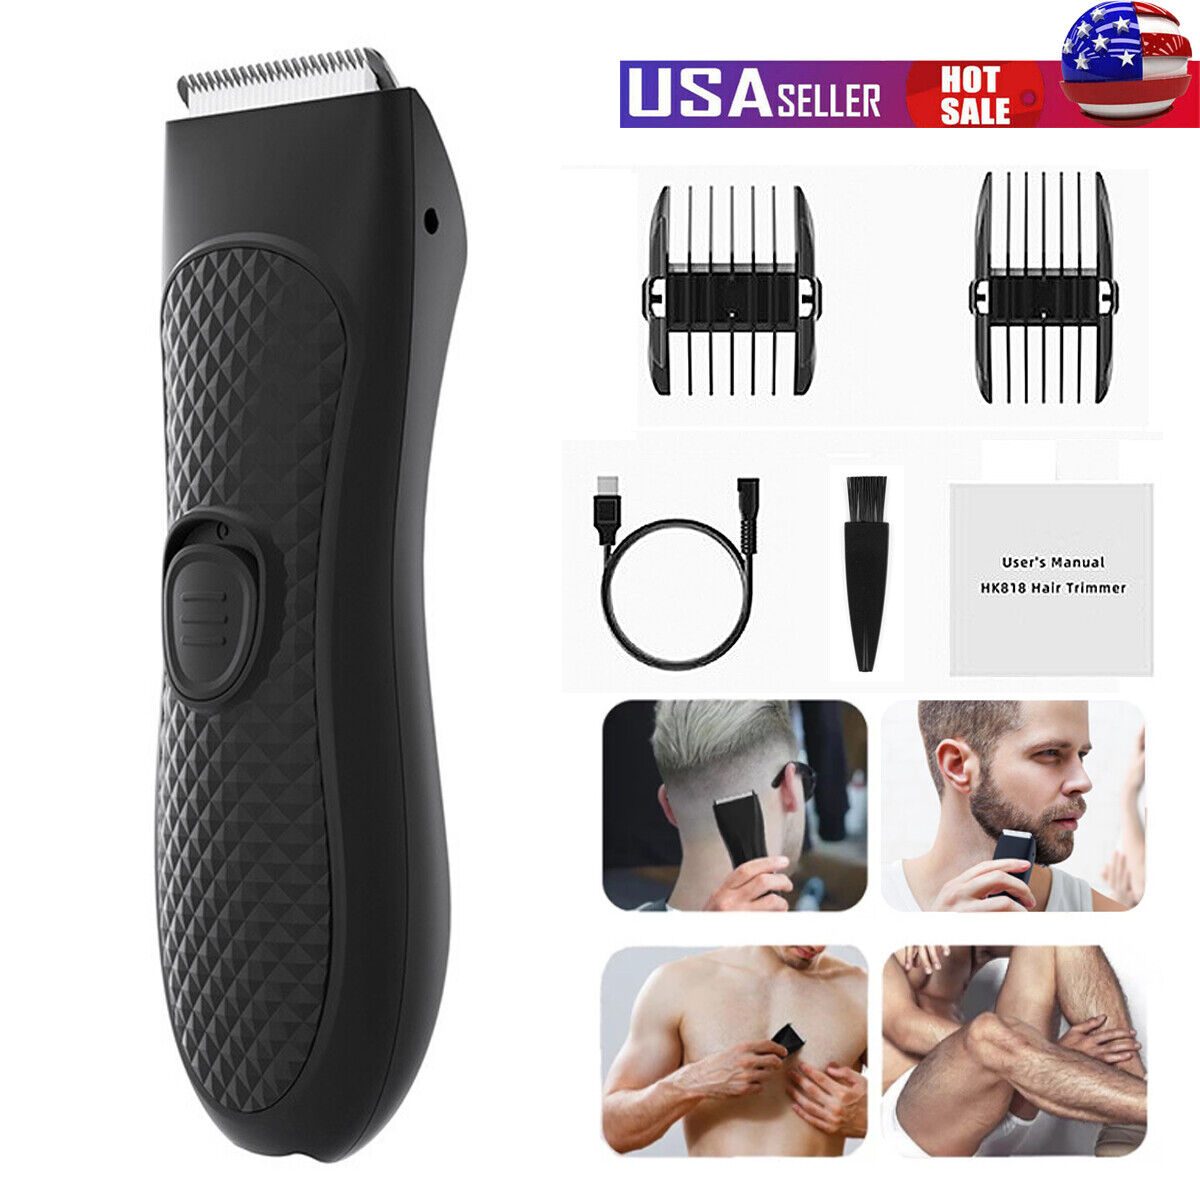 Body Trimmer for Men Ball Shaver Electric Groin & Pubic Hair Trimmer  Waterproof | eBay